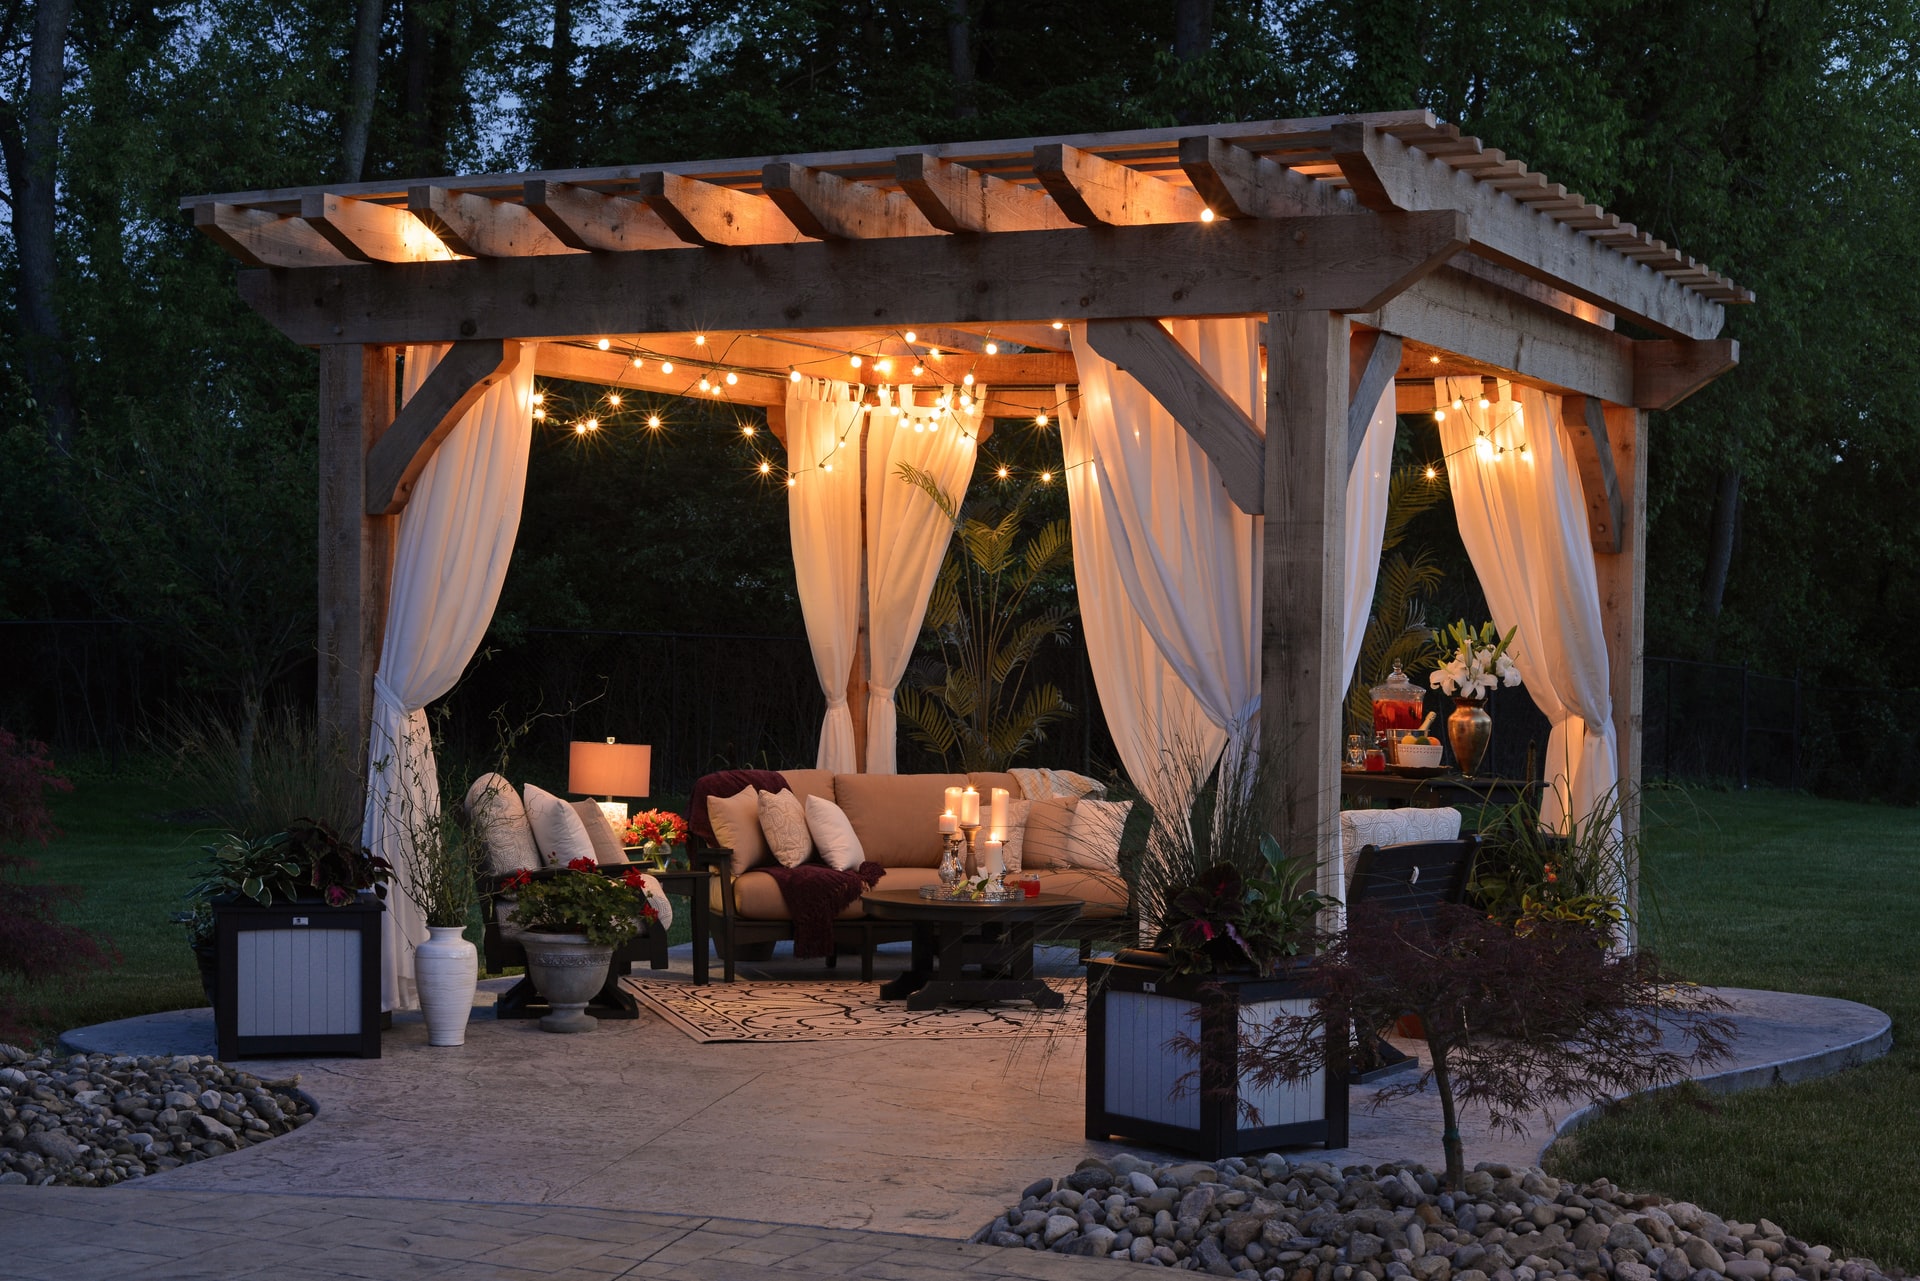 6 Tips to Repair and Improve Your Outdoor Living Space